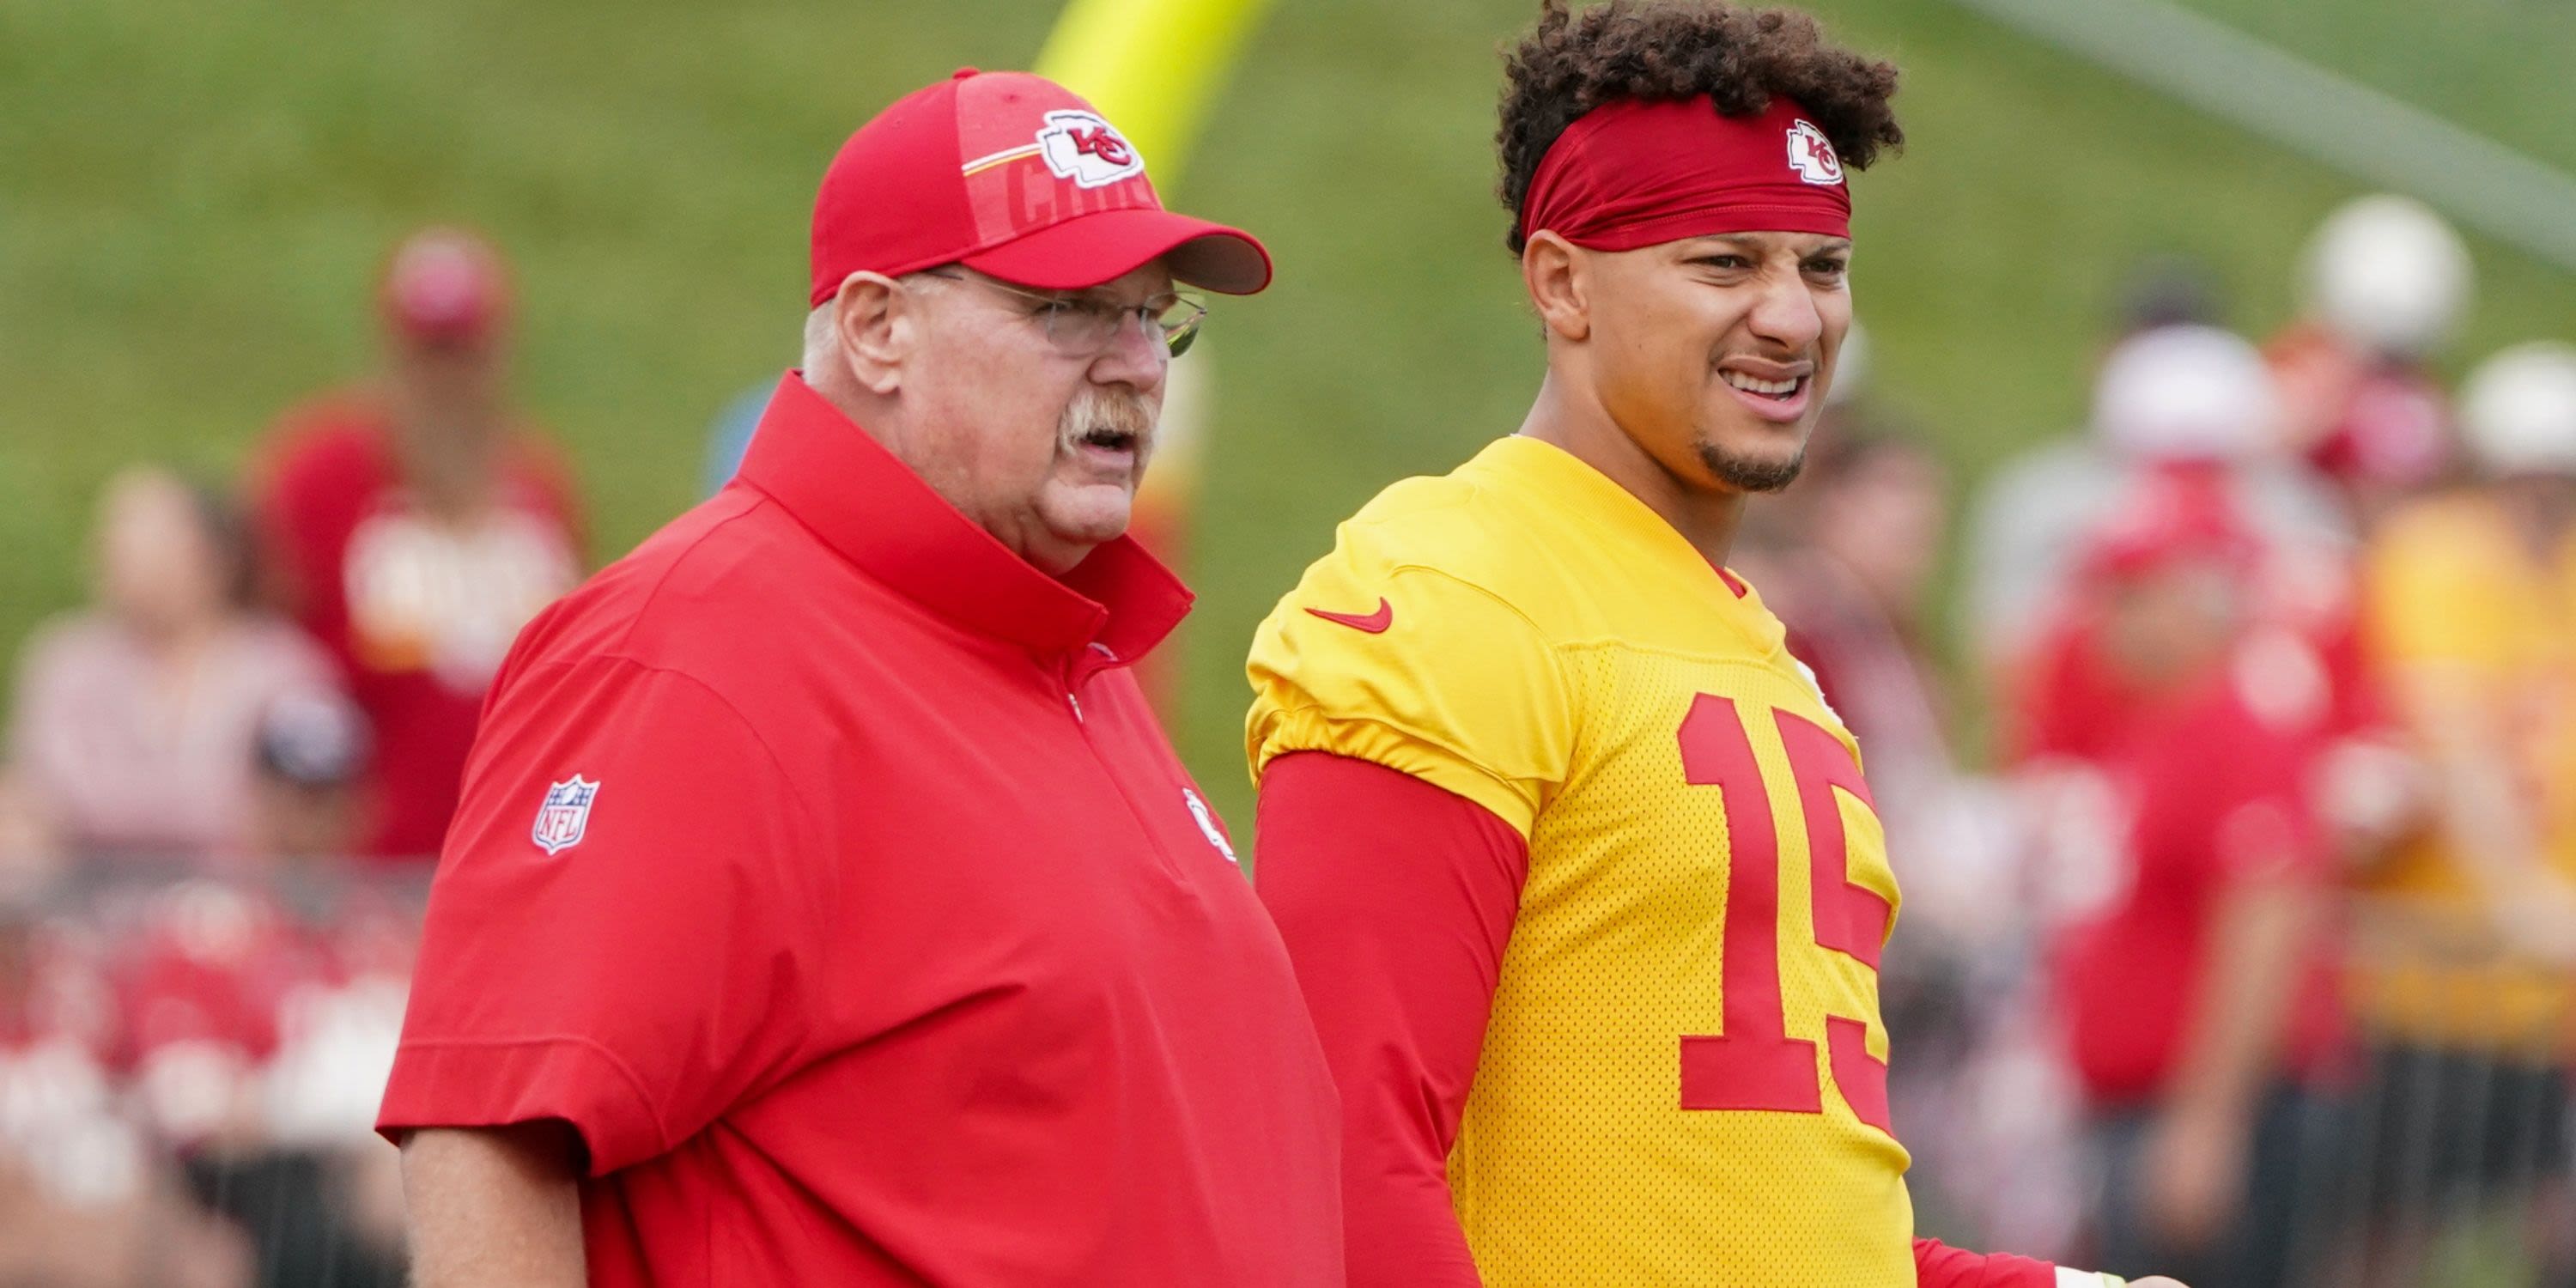 Andy Reid Wants Patrick Mahomes To Complete This Crazy Move in a Game